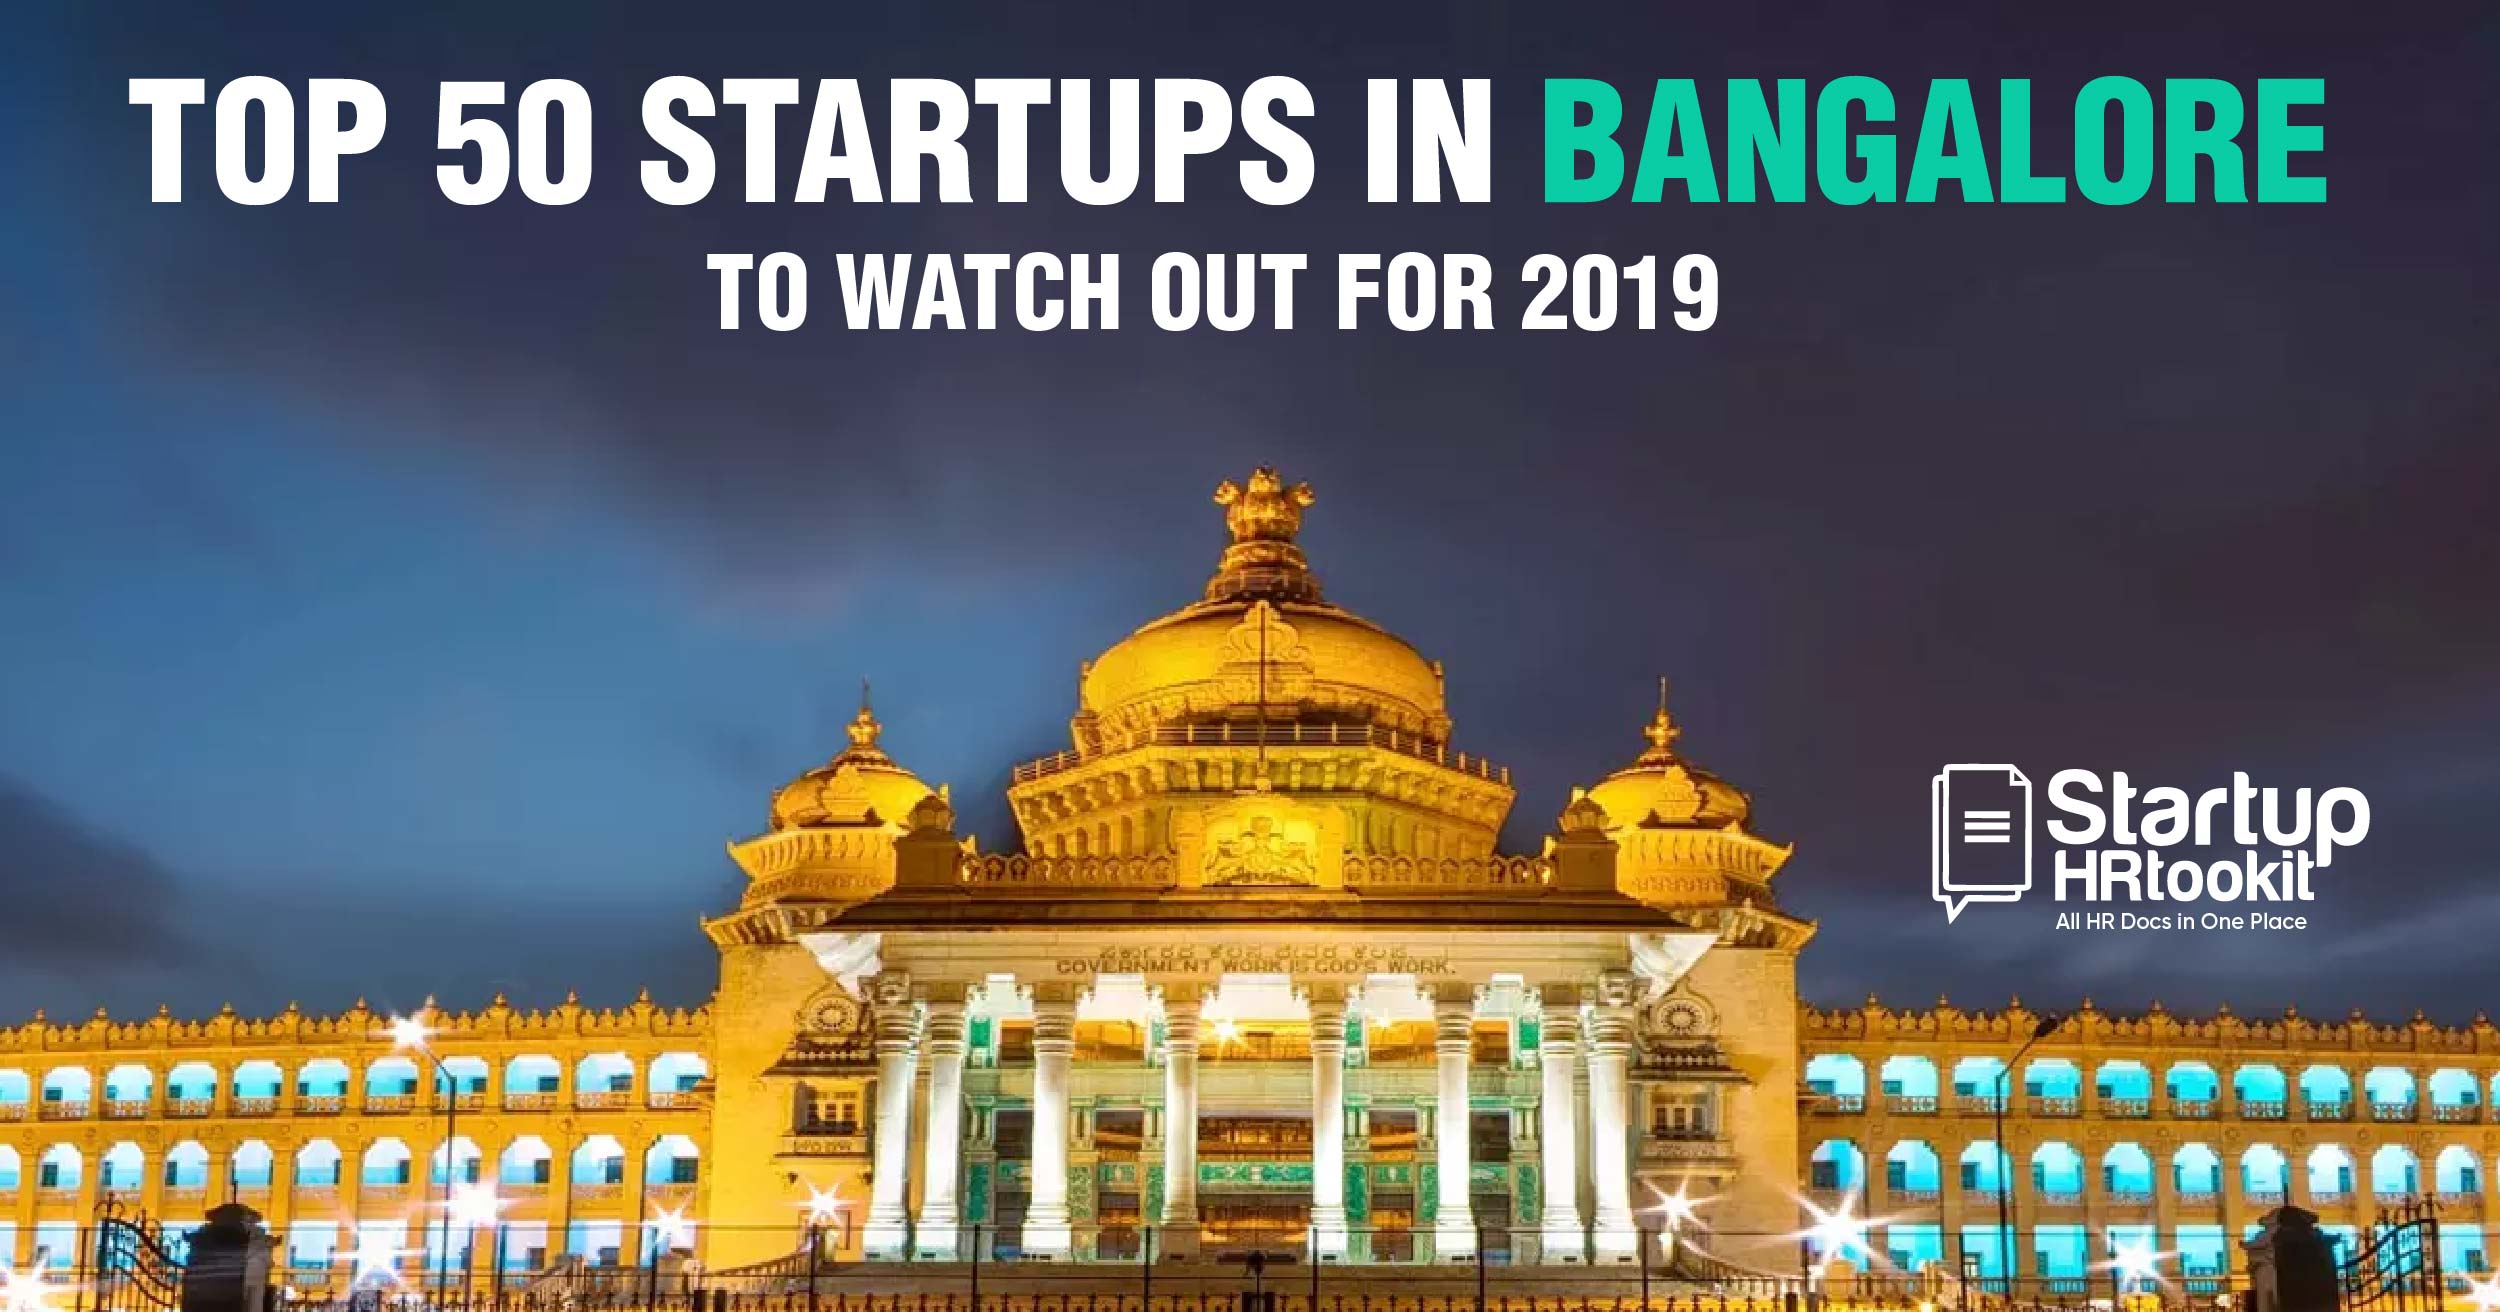 Top Startups in Bangalore to Watch out for in 2019